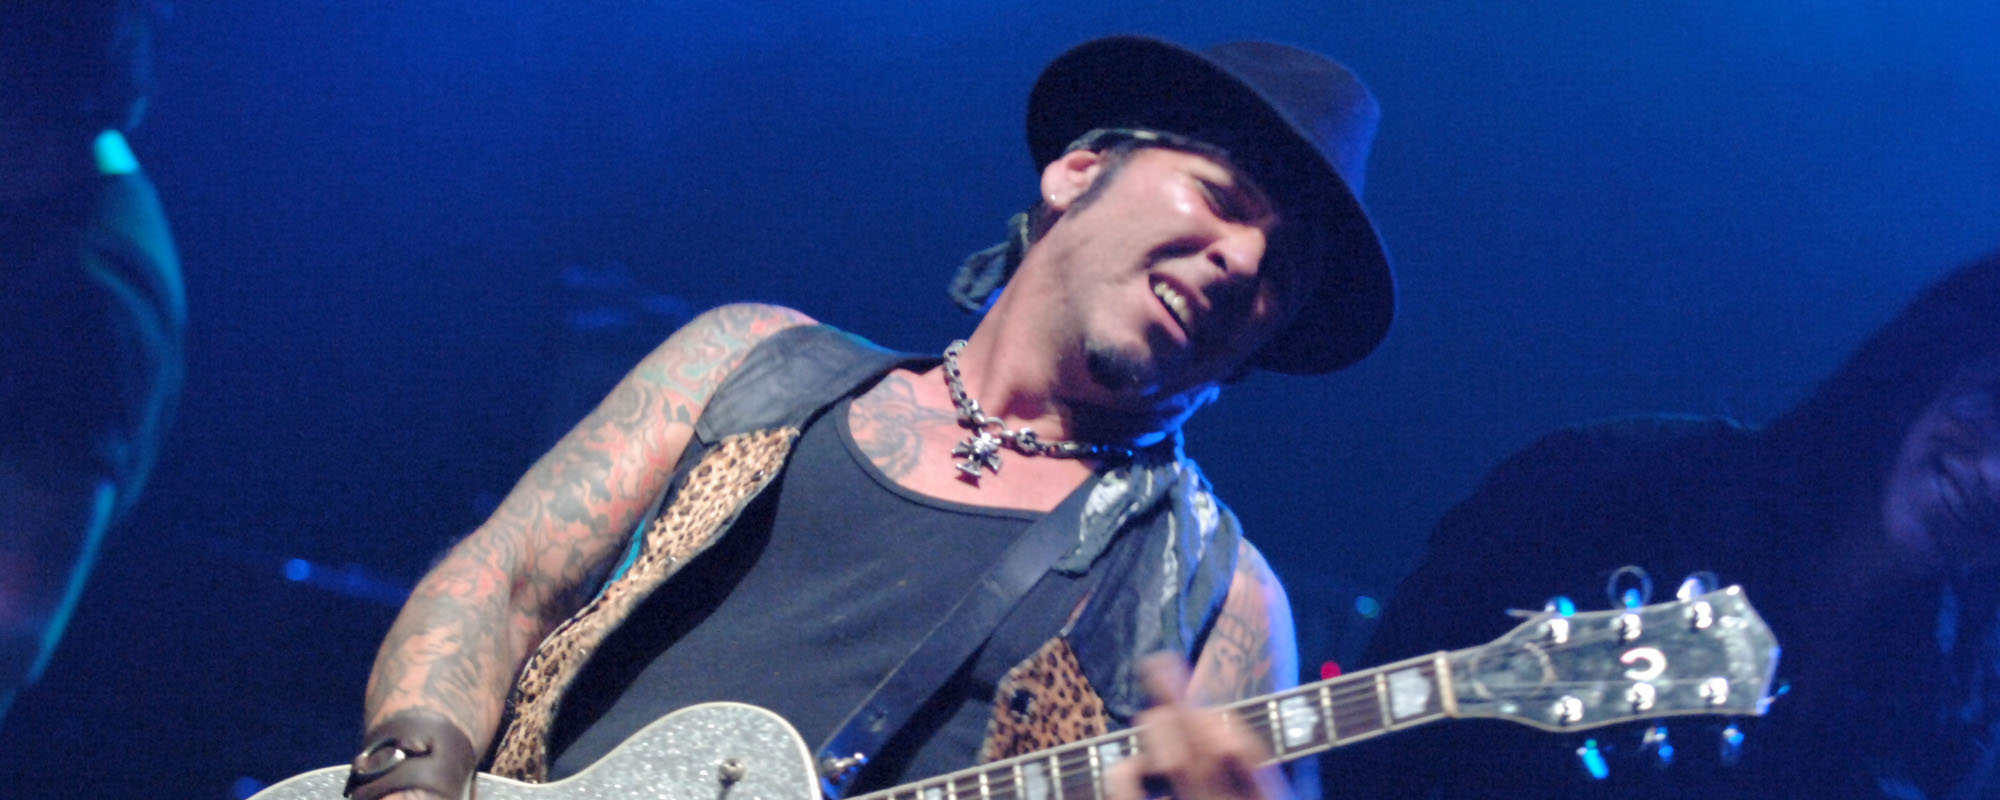 Tracii Guns of L.A. Guns Plays Entire Show Live from the Venue’s Bathroom